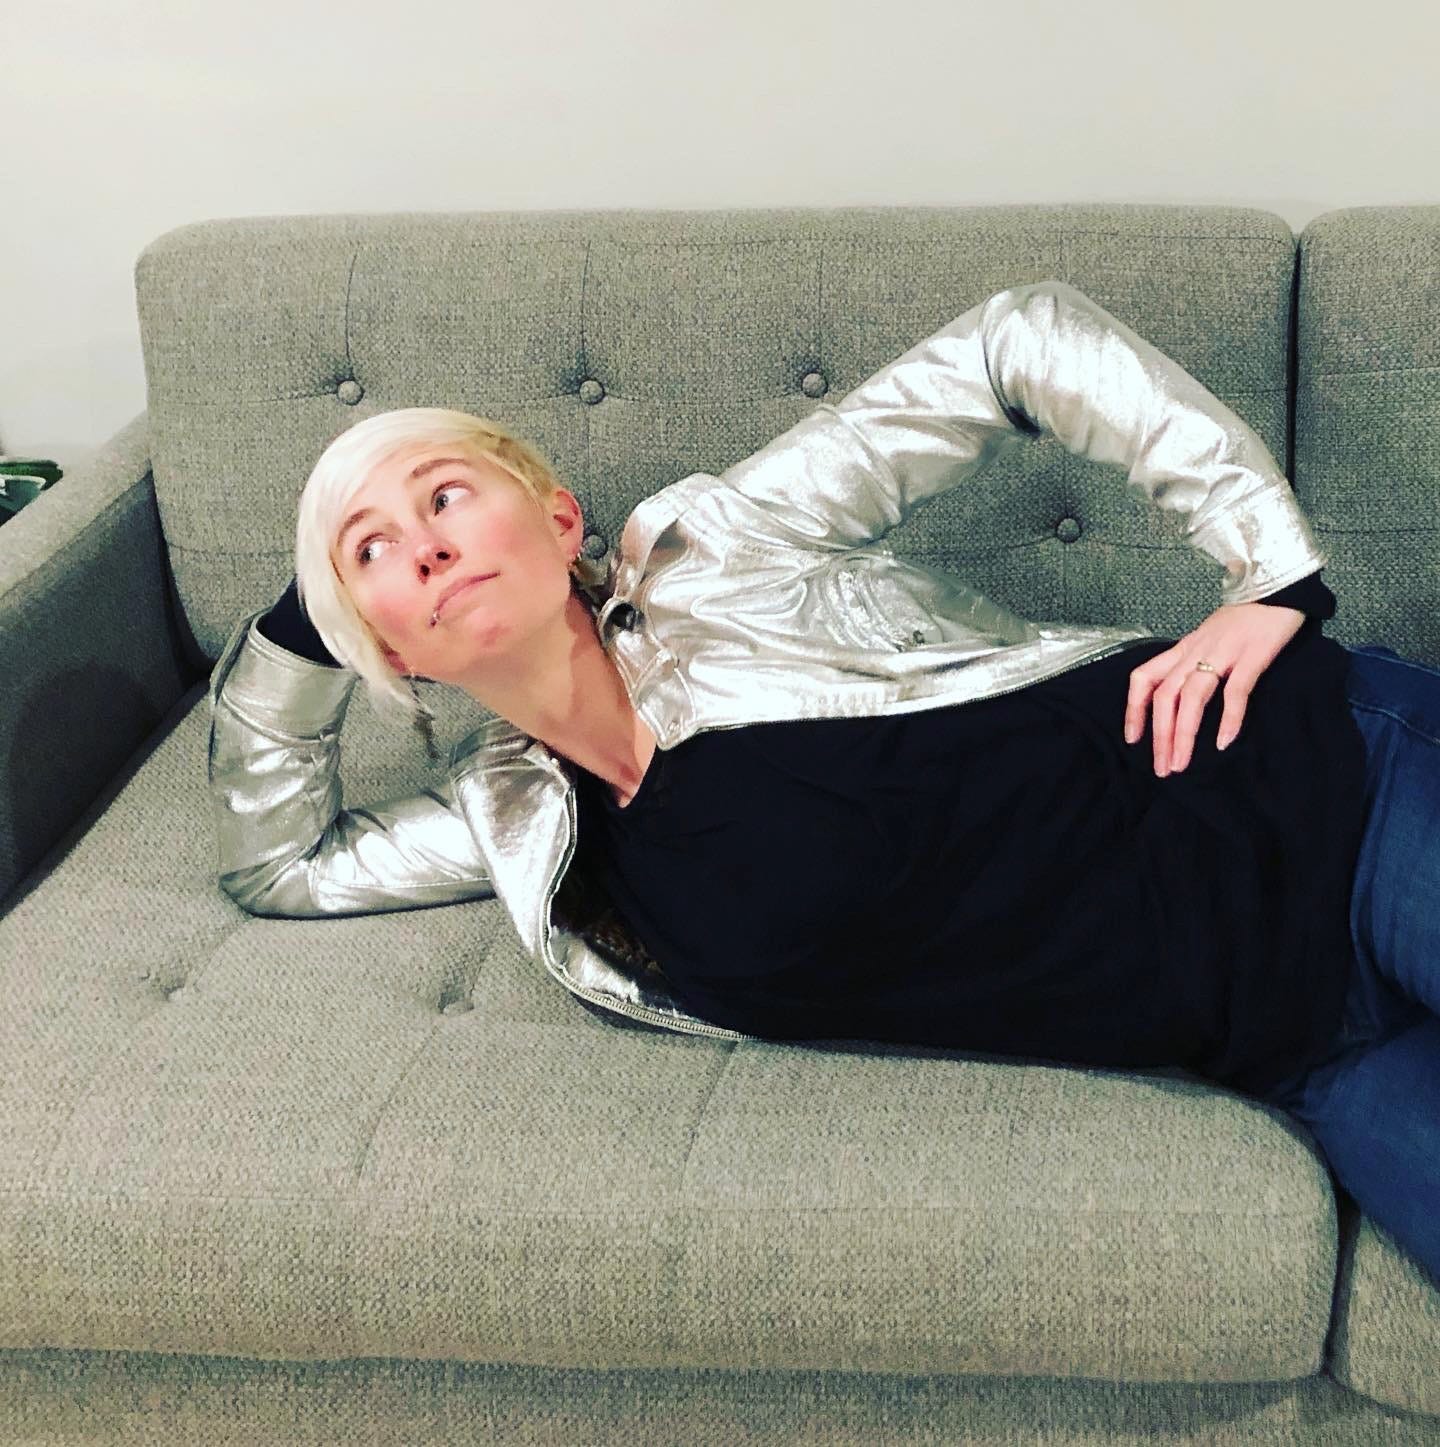 Jessie lying on a couch wearing a ridiculous silver leather jacket